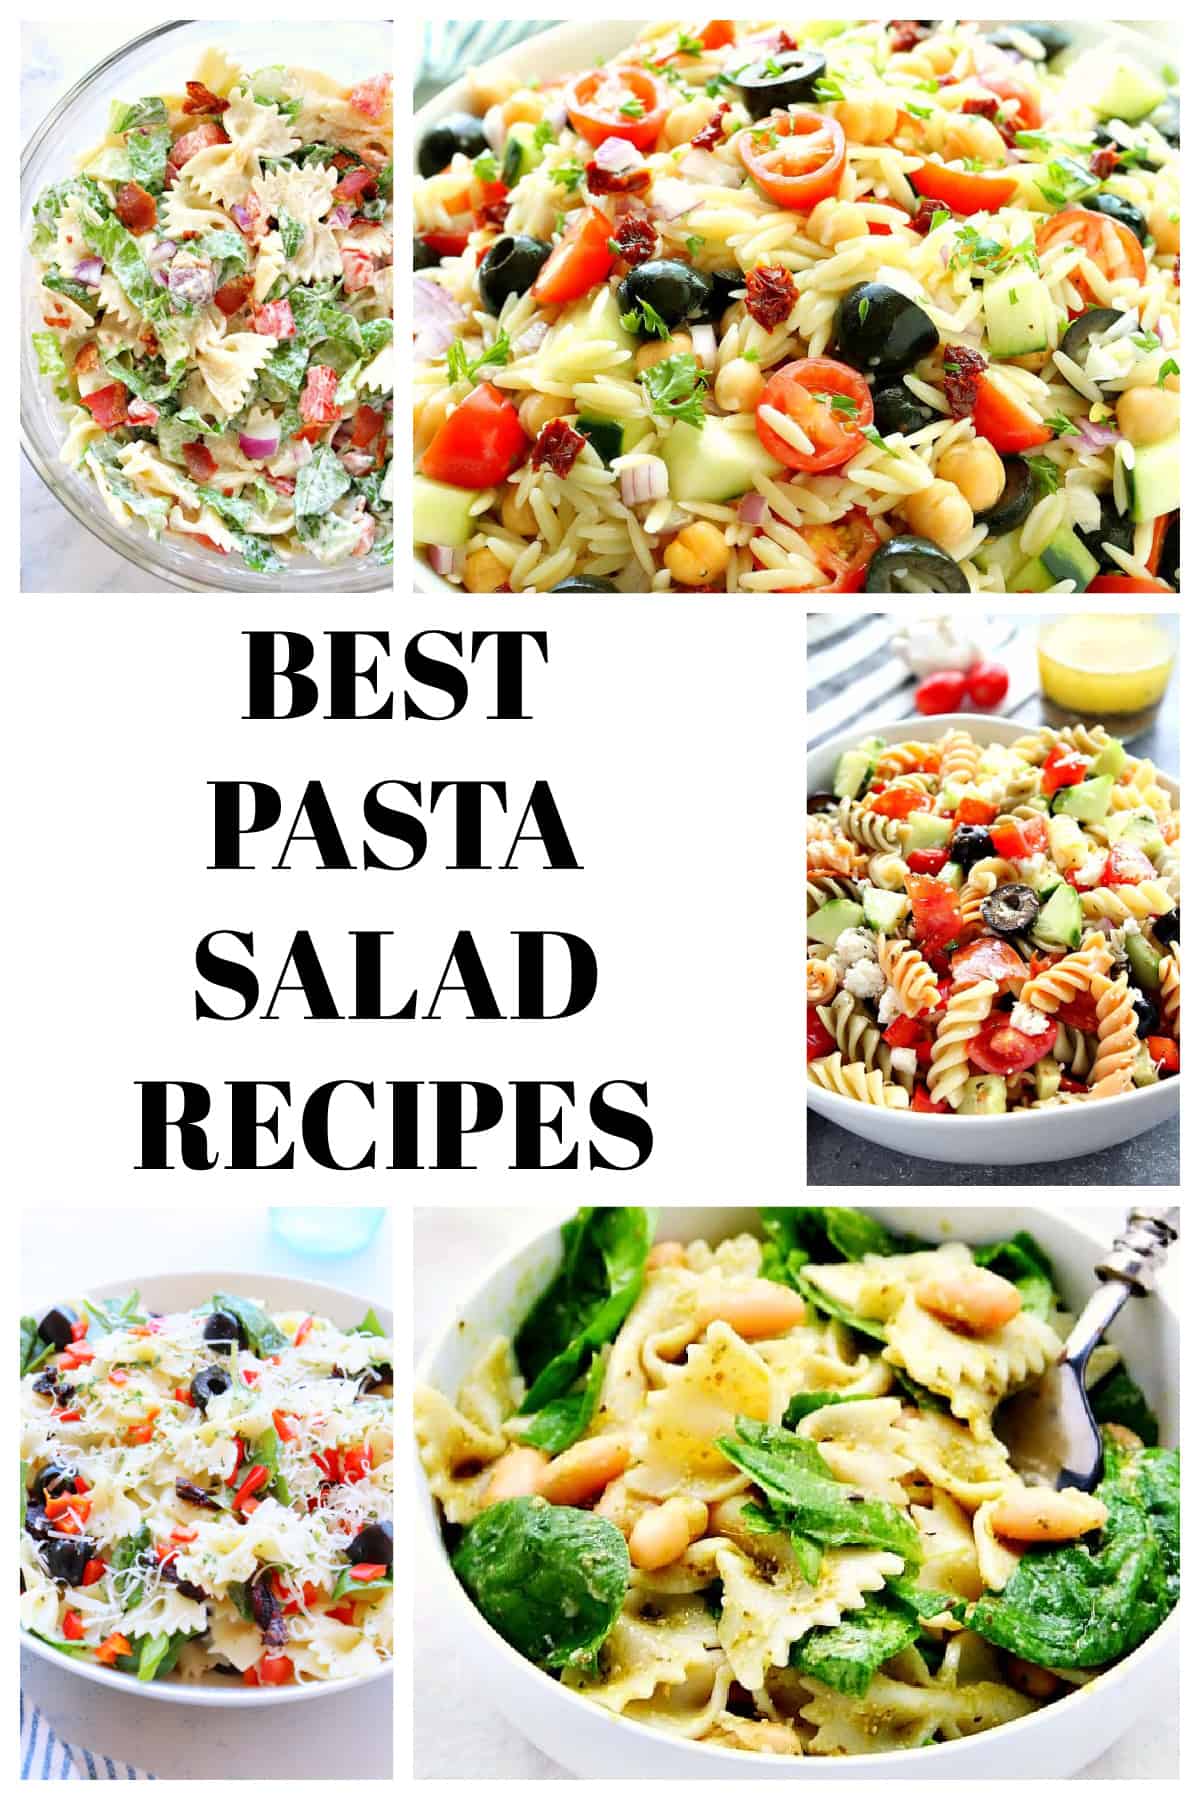 Photo collage with photos of pasta salads and text.